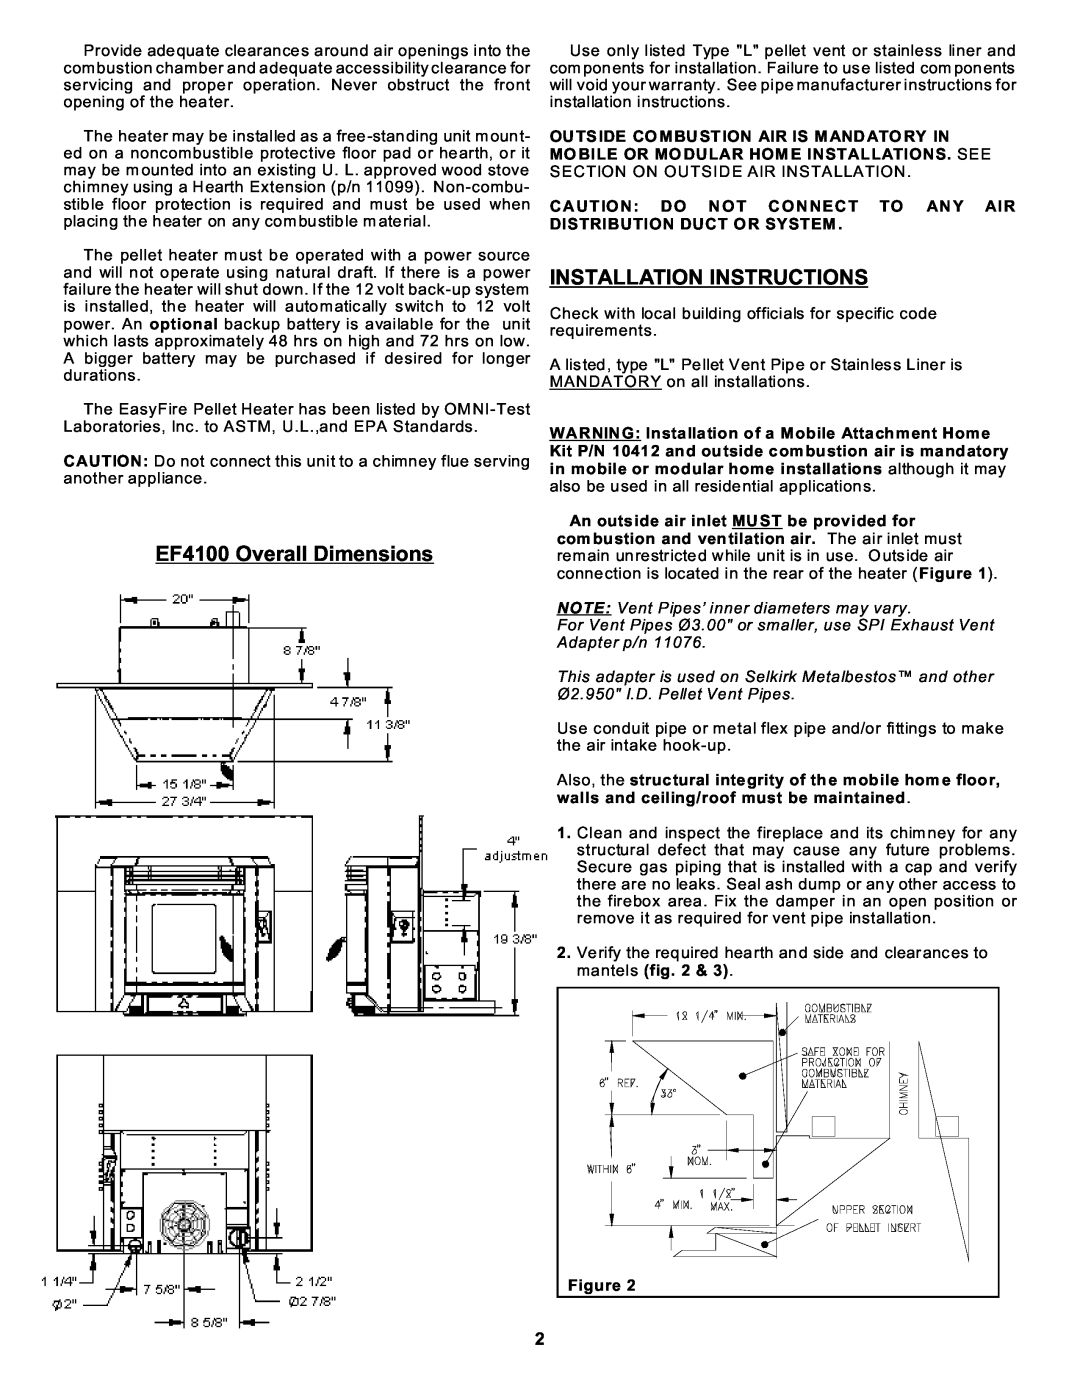 Sierra Products EF-4001B operating instructions EF4100 Overall Dimensions, Installation Instructions 